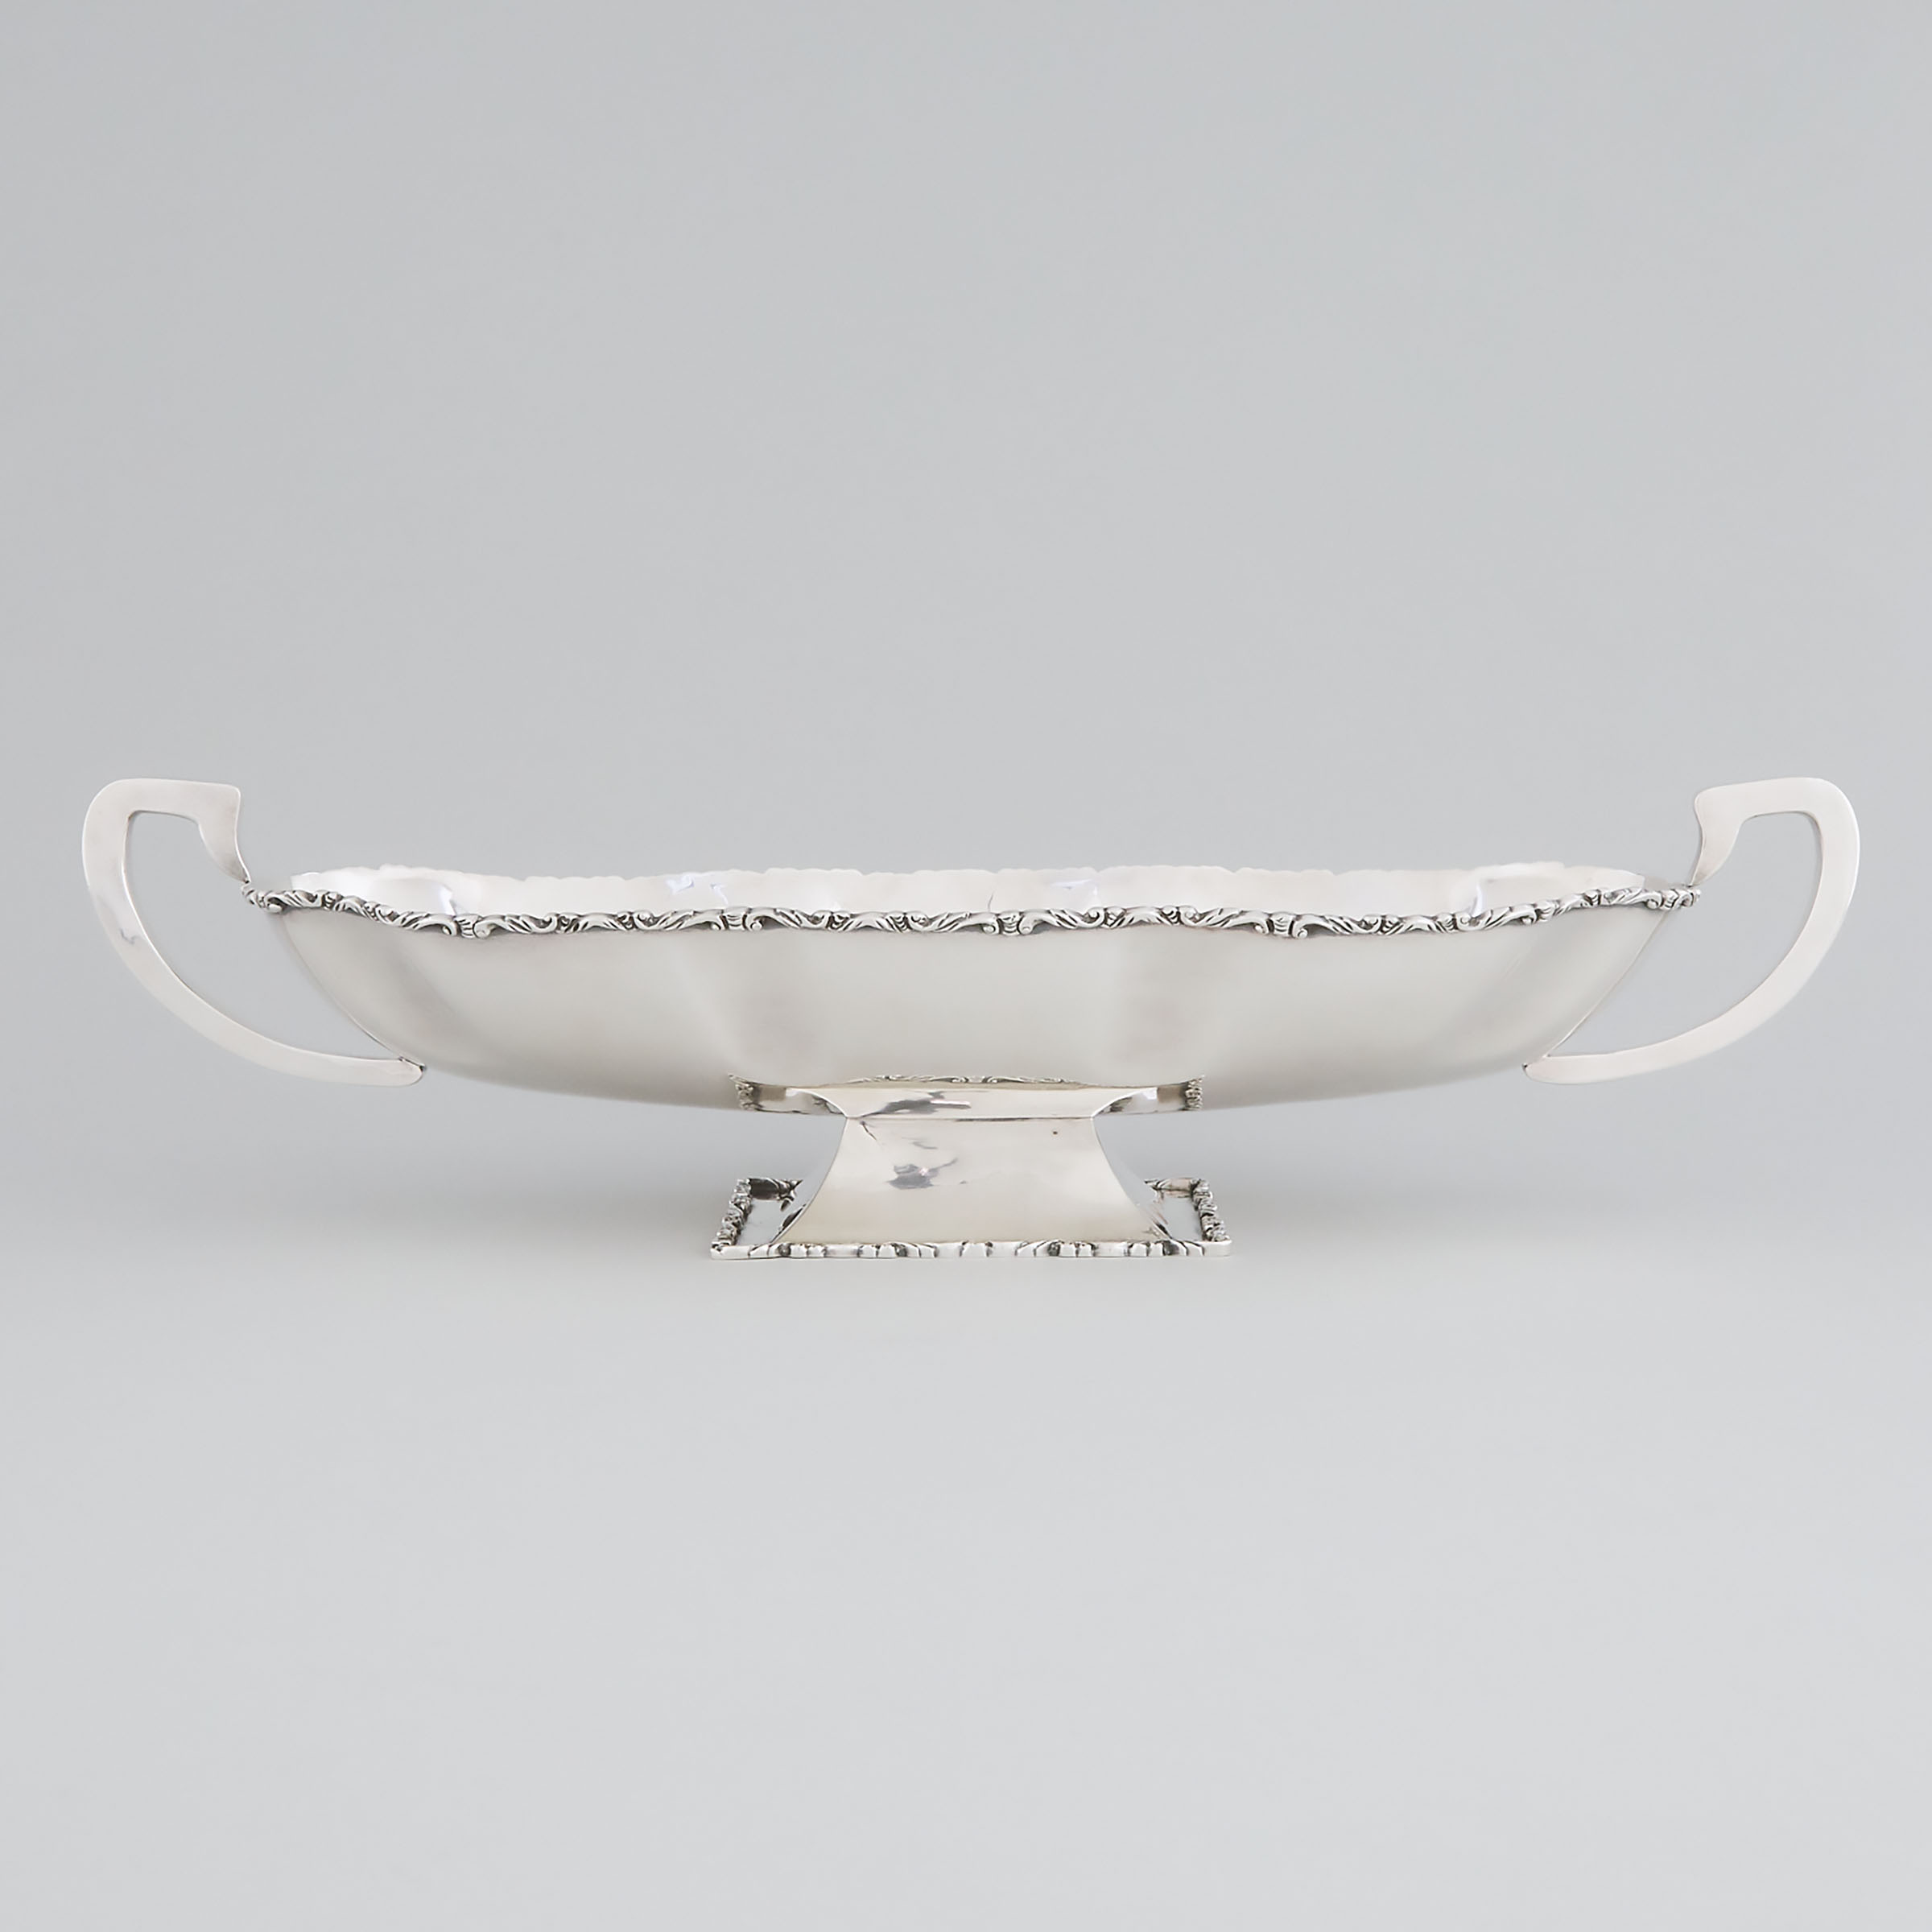 Mexican Silver Two-Handled Oval Centrepiece Bowl, mid-20th century